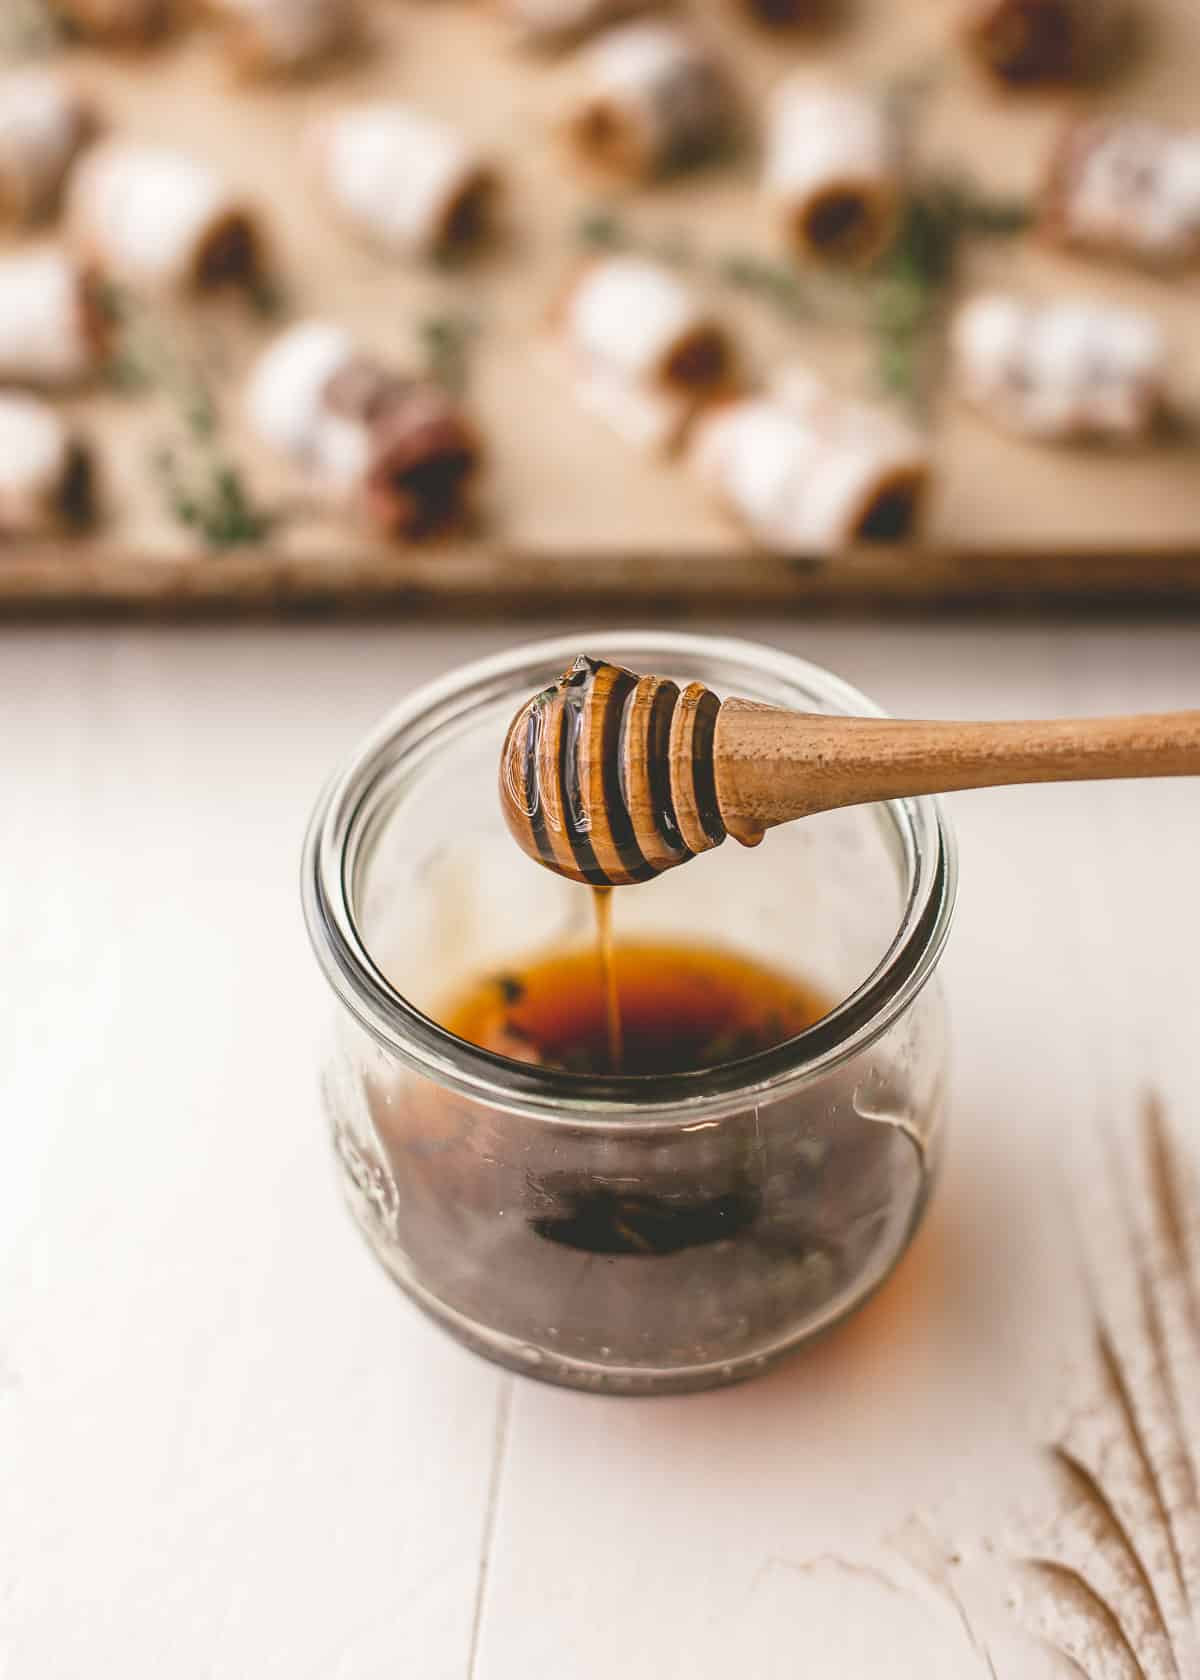 balsamic honey in a small clear bowl